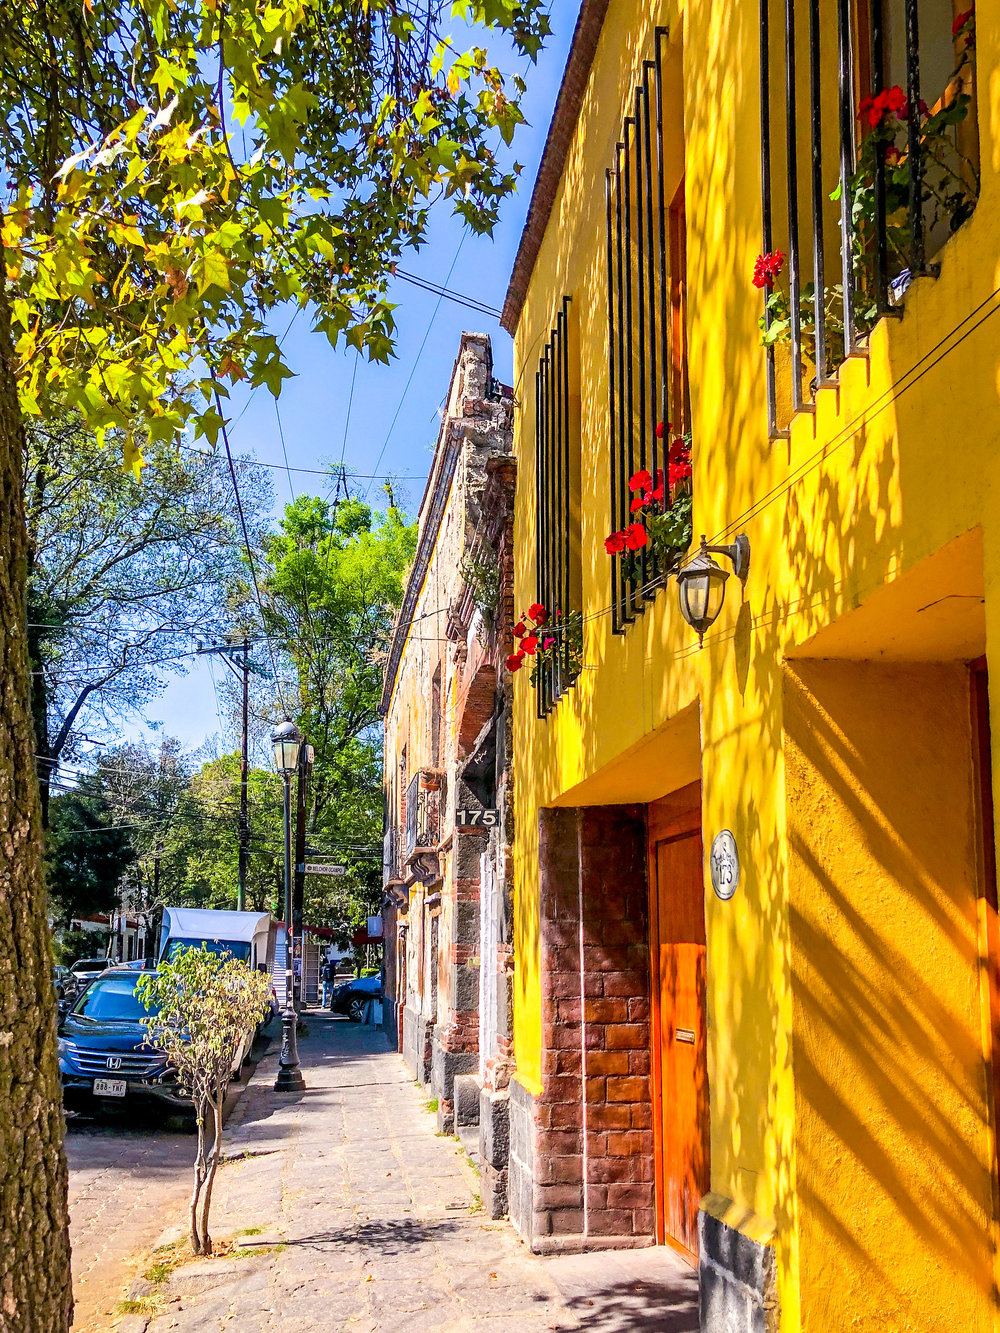 Copy of The Ultimate Self Guided Walking Tour of Historic Coyoacán, Mexico City's Oldest Neighbourhood